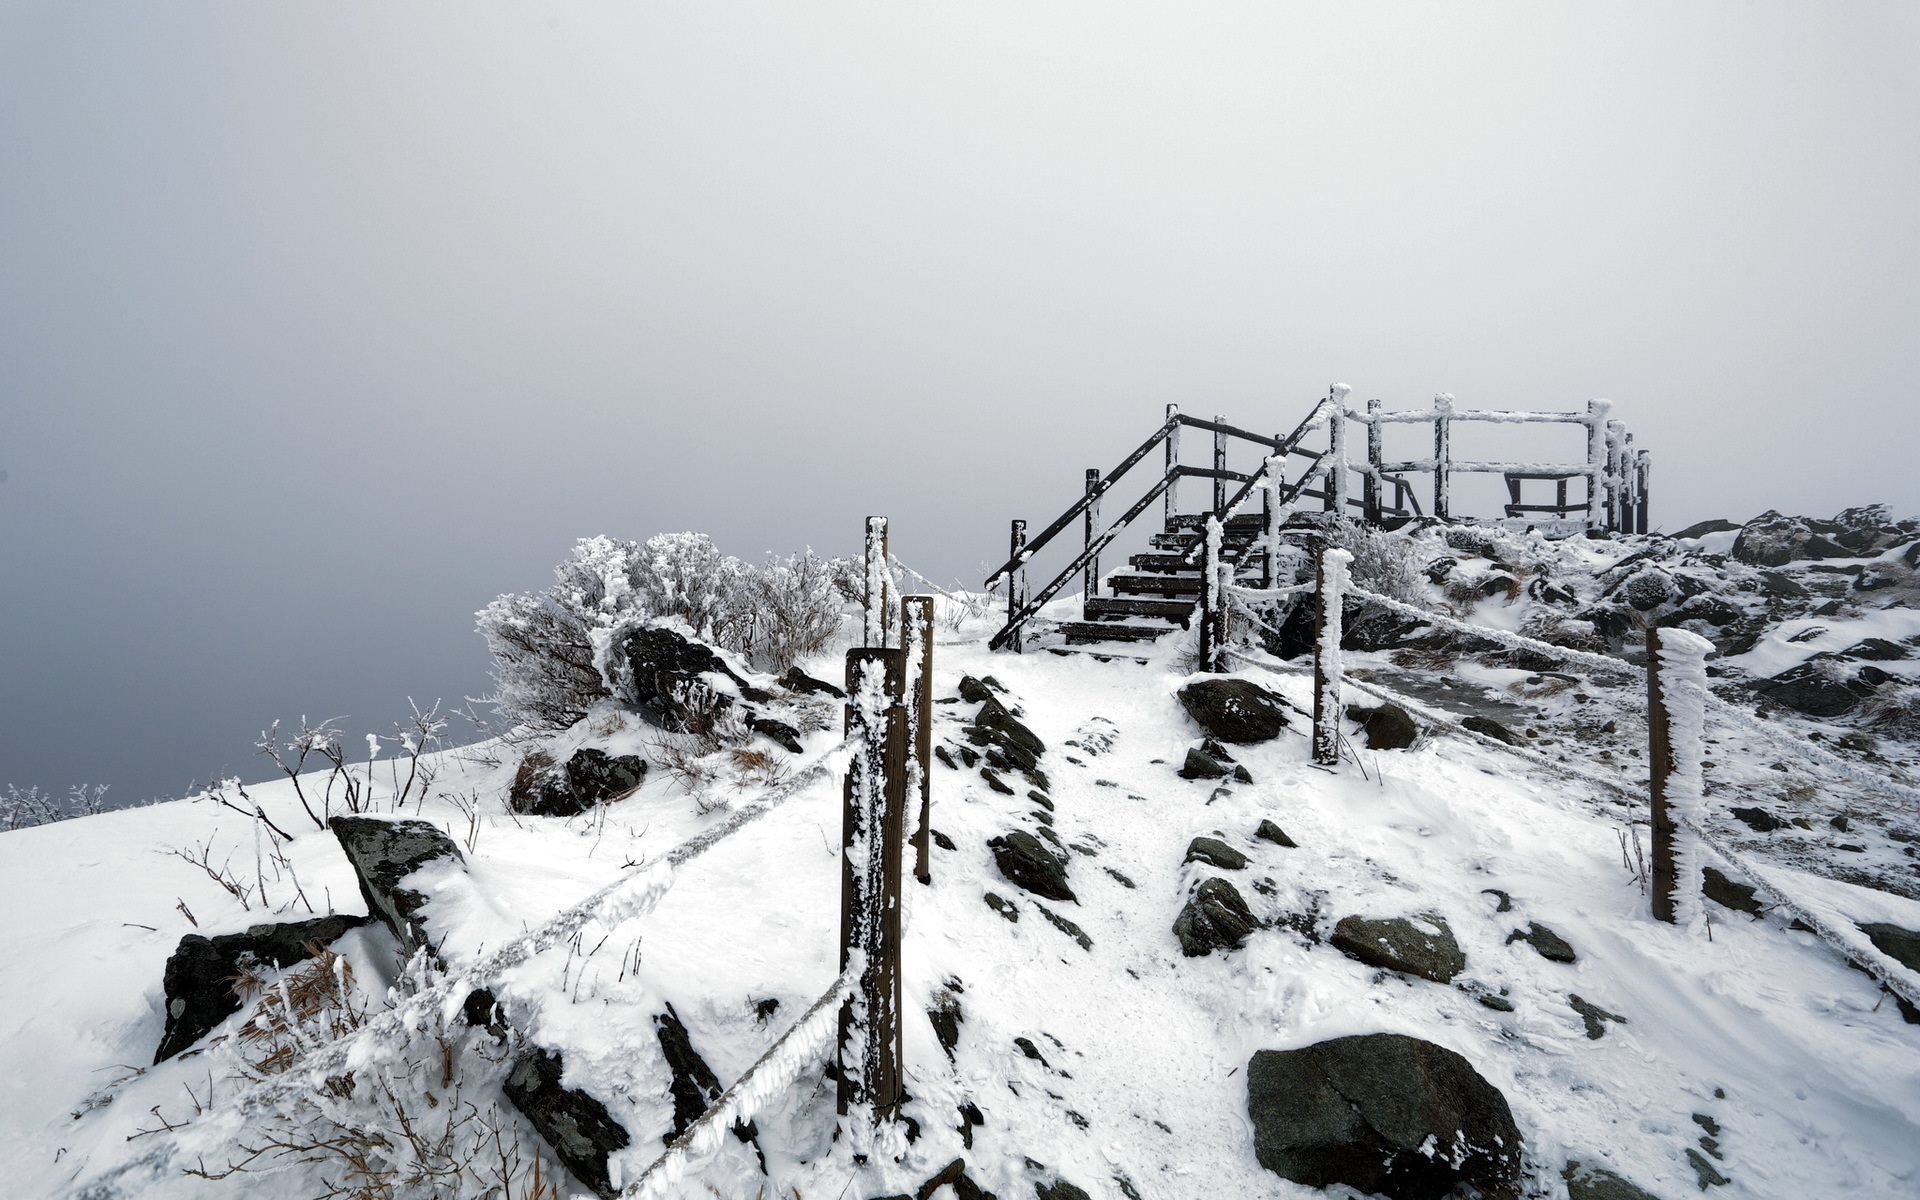 stairs, Nature, Landscapes, Winter, Snow, Architecture, Mountains, Hills, Stone, Rocks, Sky, Fence Wallpaper